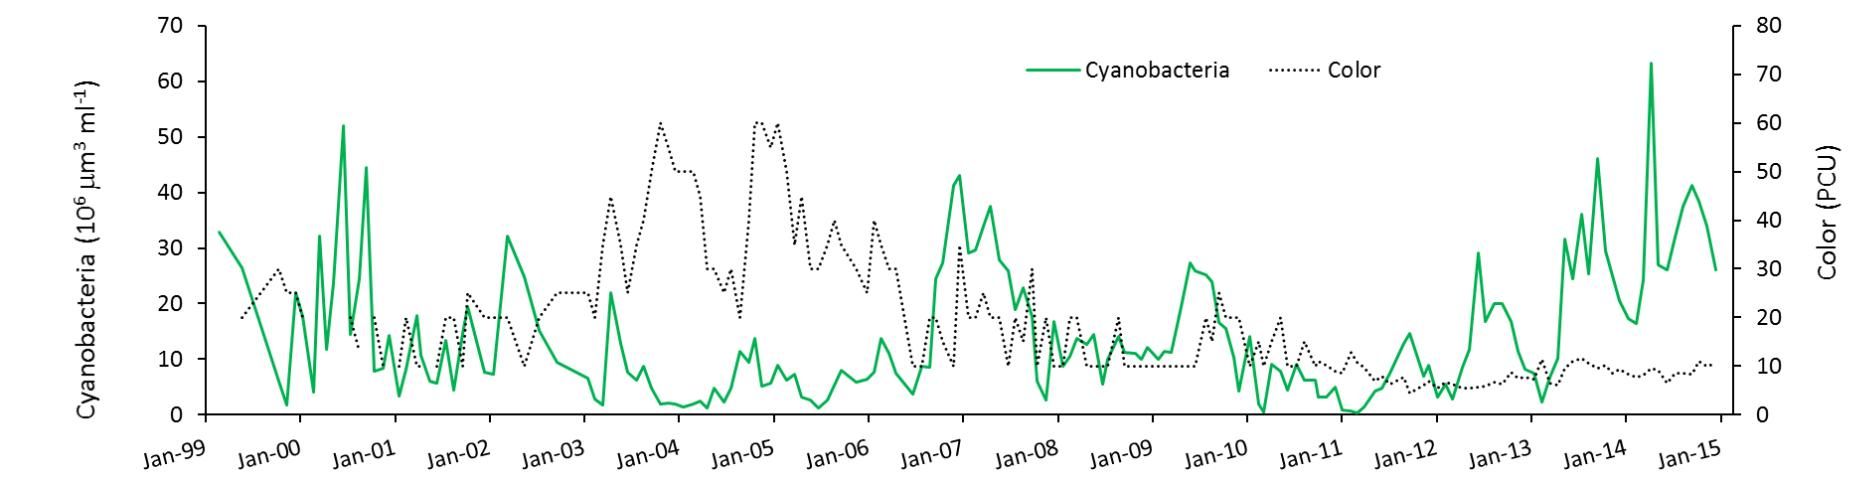 Figure 4. The biomass of cyanobacteria over a period of 15 years in Lake Harris, based on monthly sampling, superimposed on a plot of water color, which represents materials dissolved in the water that can absorb light and slow the growth of algae. Cyanobacteria biomass is reduced during periods when color is higher.